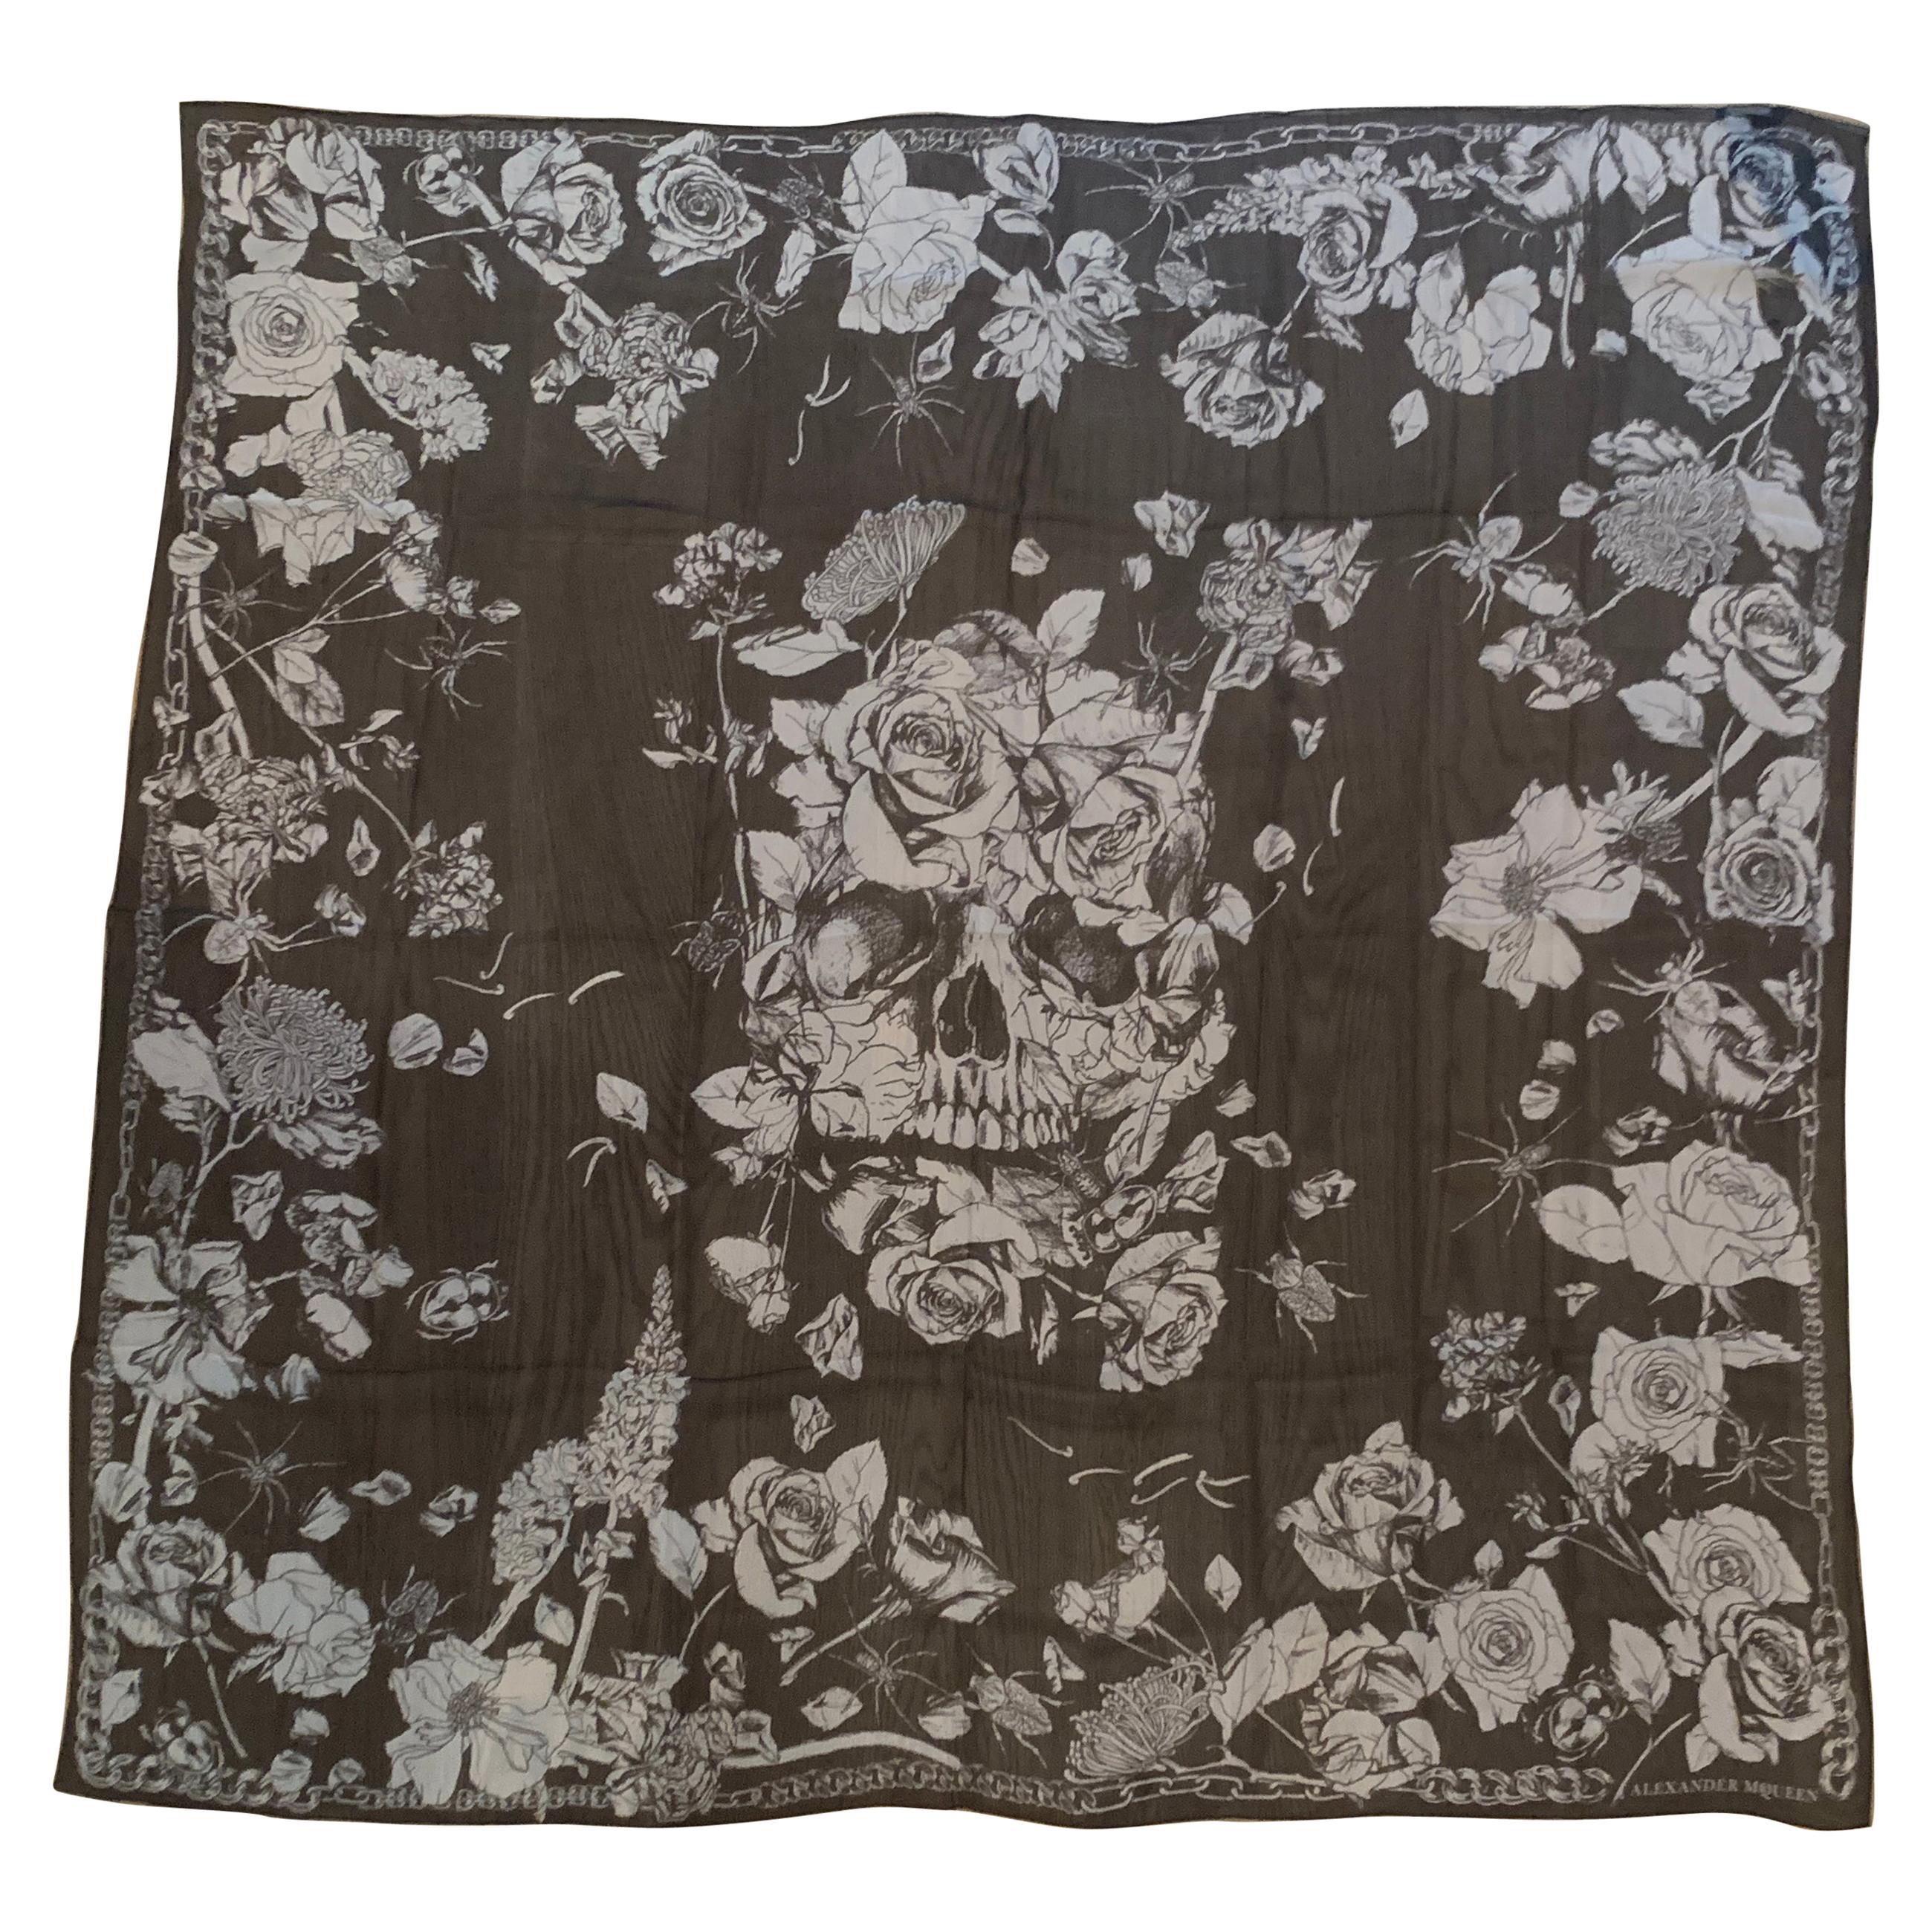 Huge New Alexander Mcqueen Silk Skull, Roses and Insect Semi-Sheer Black Scarf 